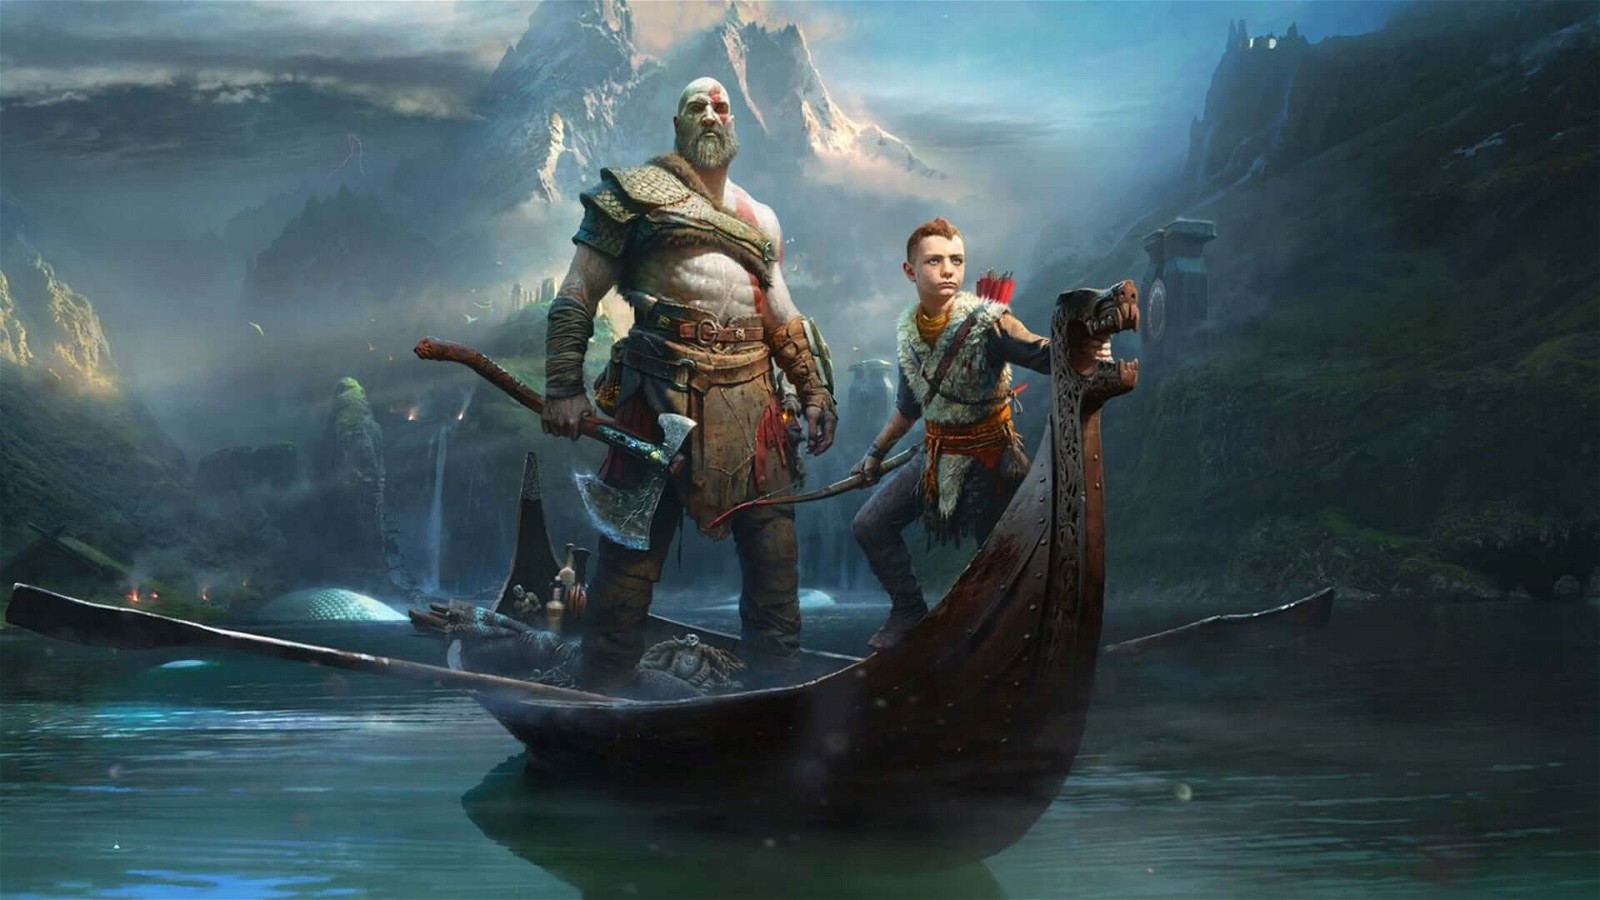 The 2018 entry into the God of War franchise is undeniably an amazing game.